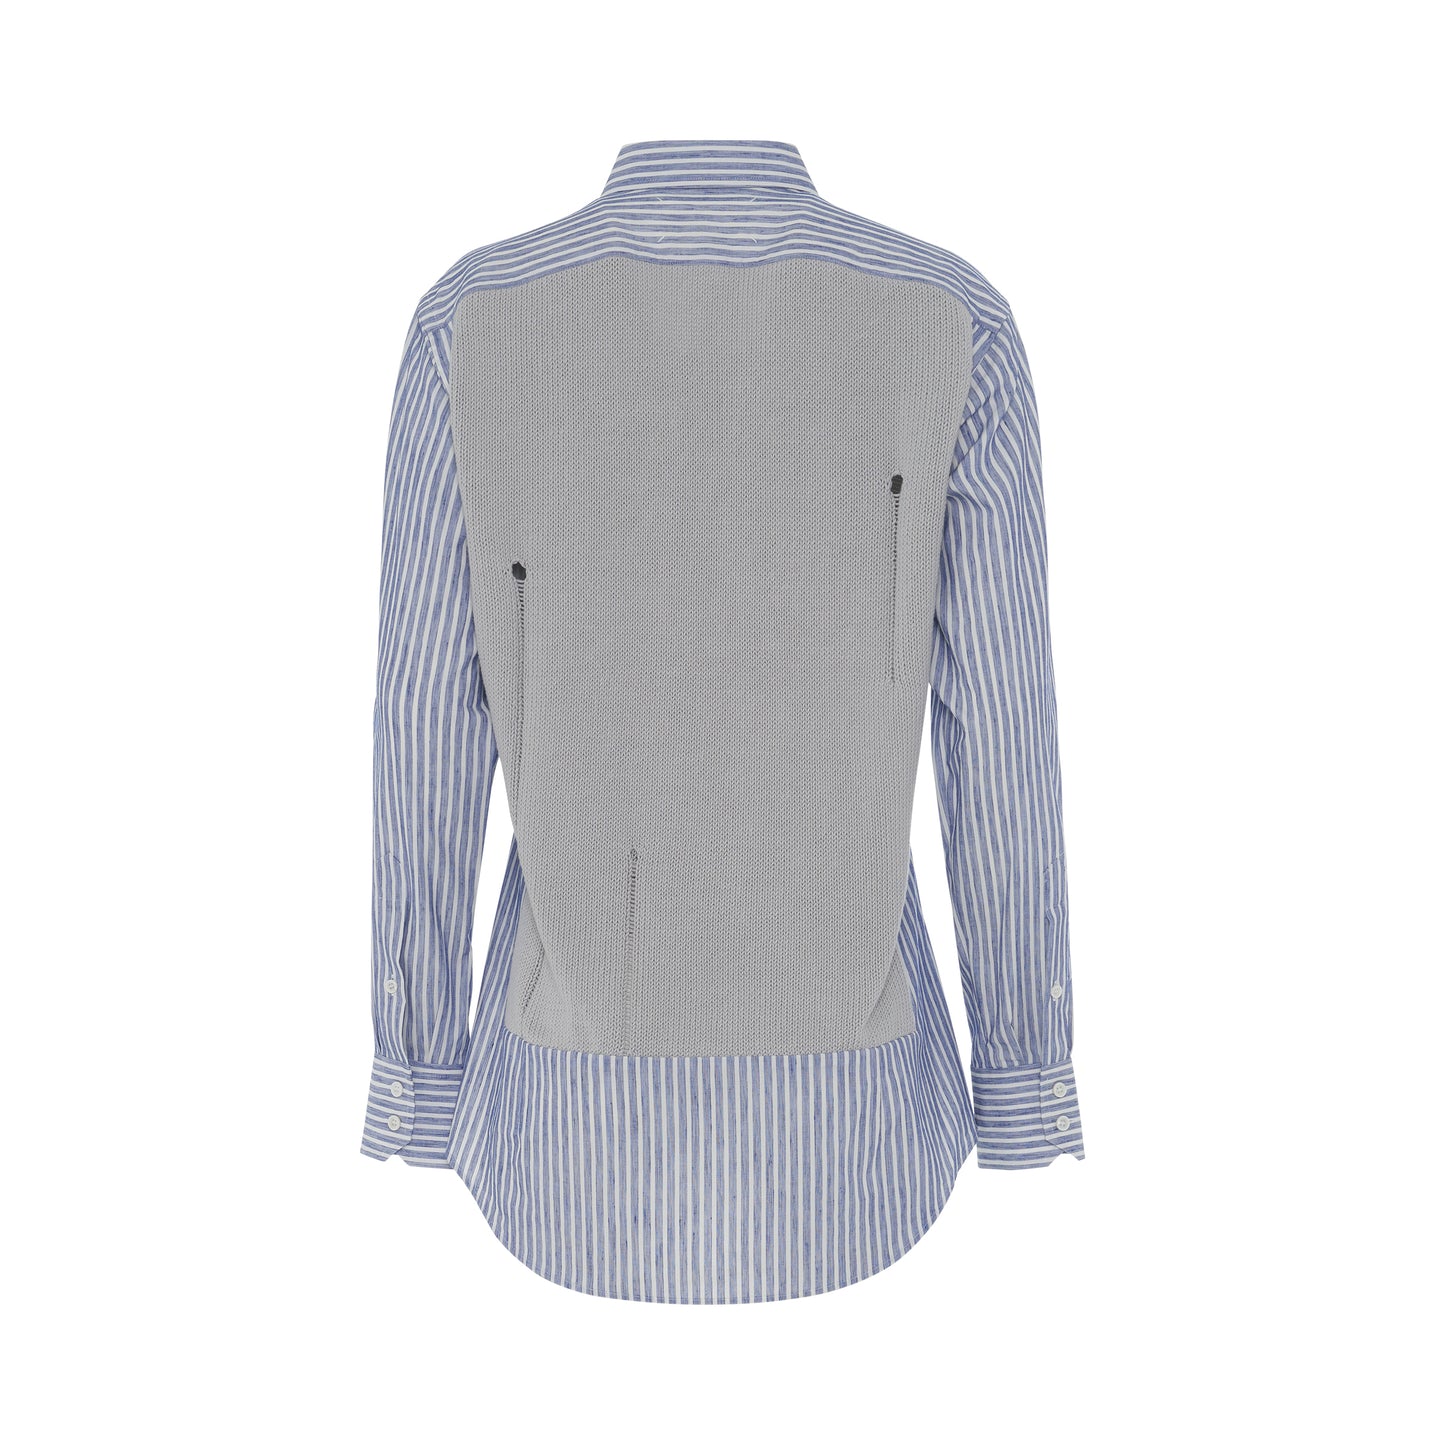 Layered Striped Cotton Shirt with Wool Vest in Blue/Grey